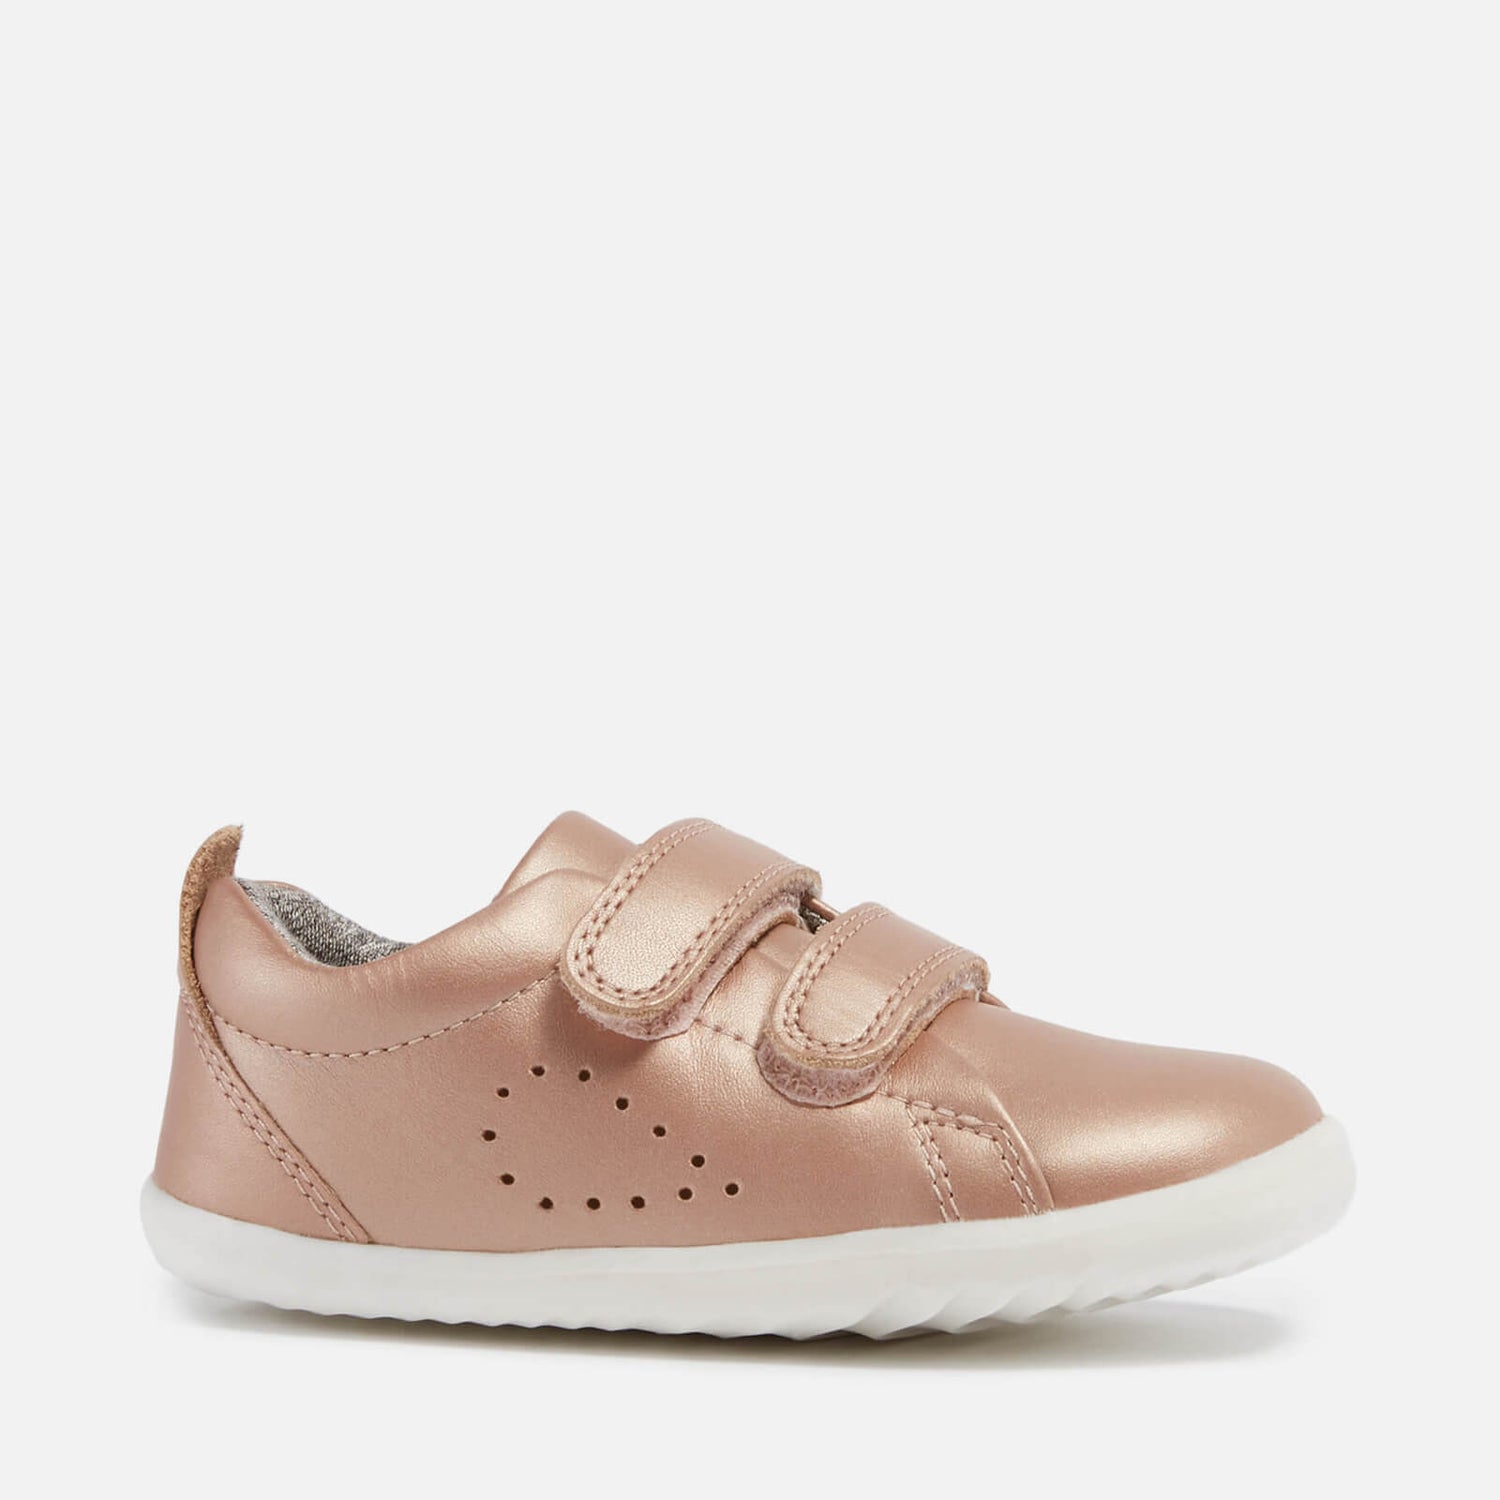 Bobux Baby Grass Court Leather Trainers